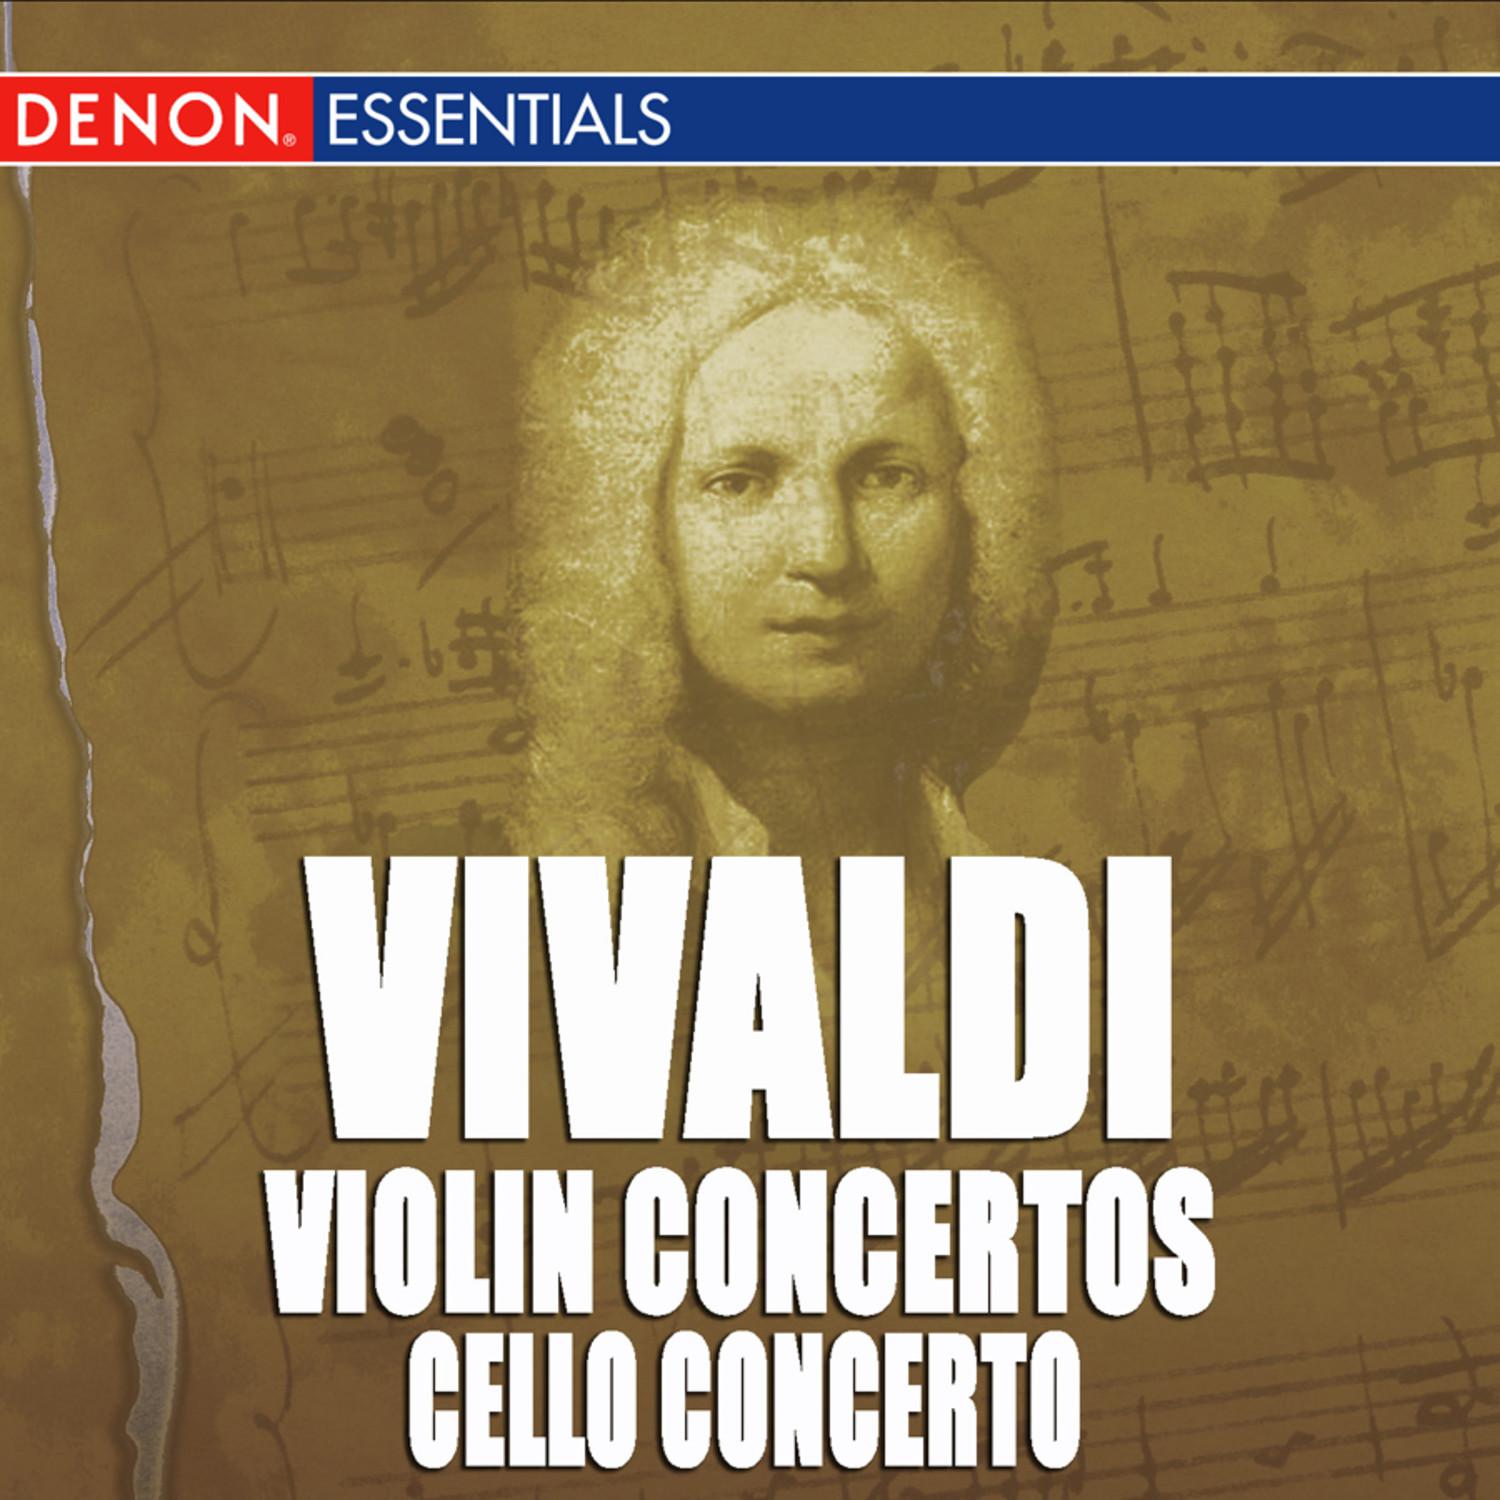 Concerto for 4 Violins, Cello, Strings and Bc No. 1 in D Major, Op. 3 RV 549: III. Allegro